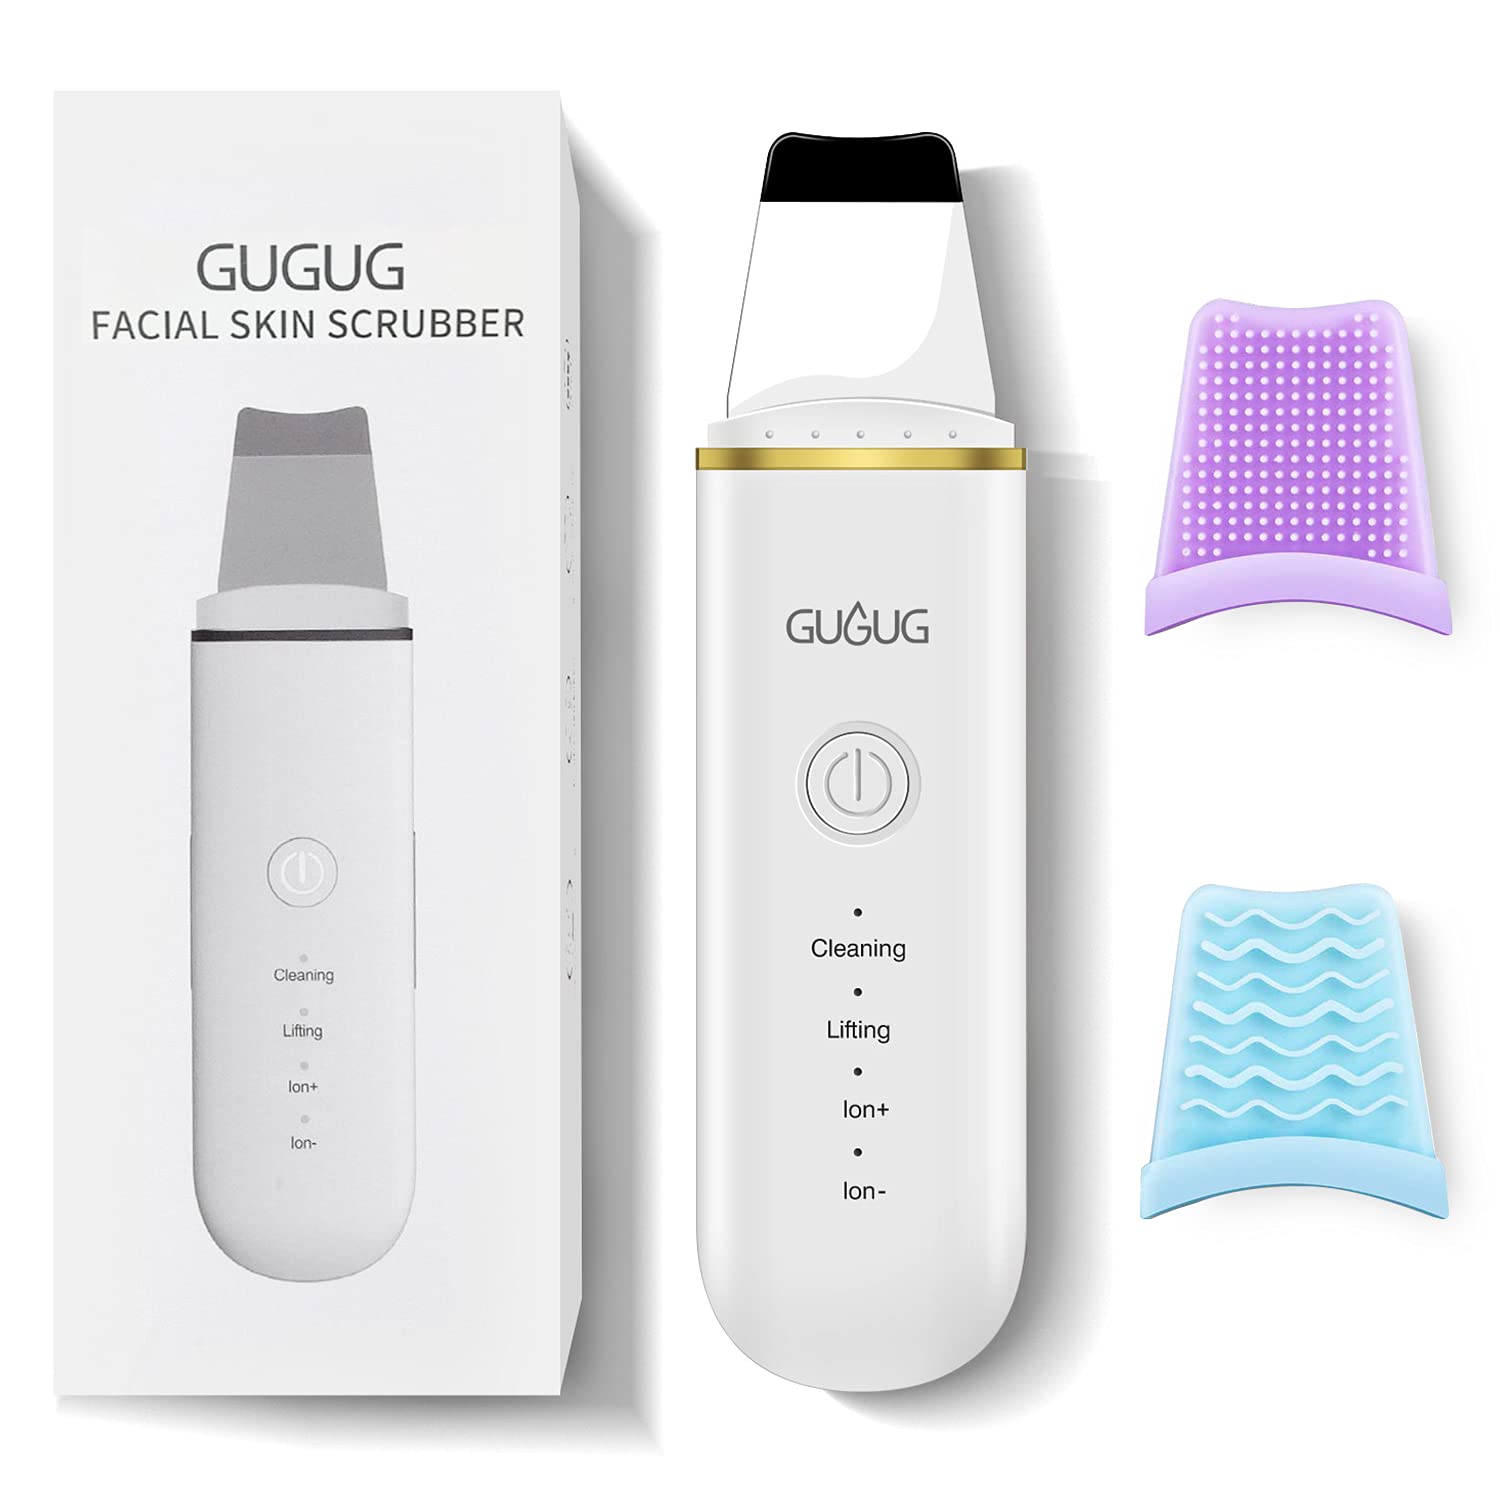 GUGUG Facial Skin Scrubber, Skin Spatula Face Blackhead Scraper with Four Modes for Blackhead Removing and Deep Cleansing, Portable and Rechargeable Pore Scrubber Include 2 Silicone Covers.